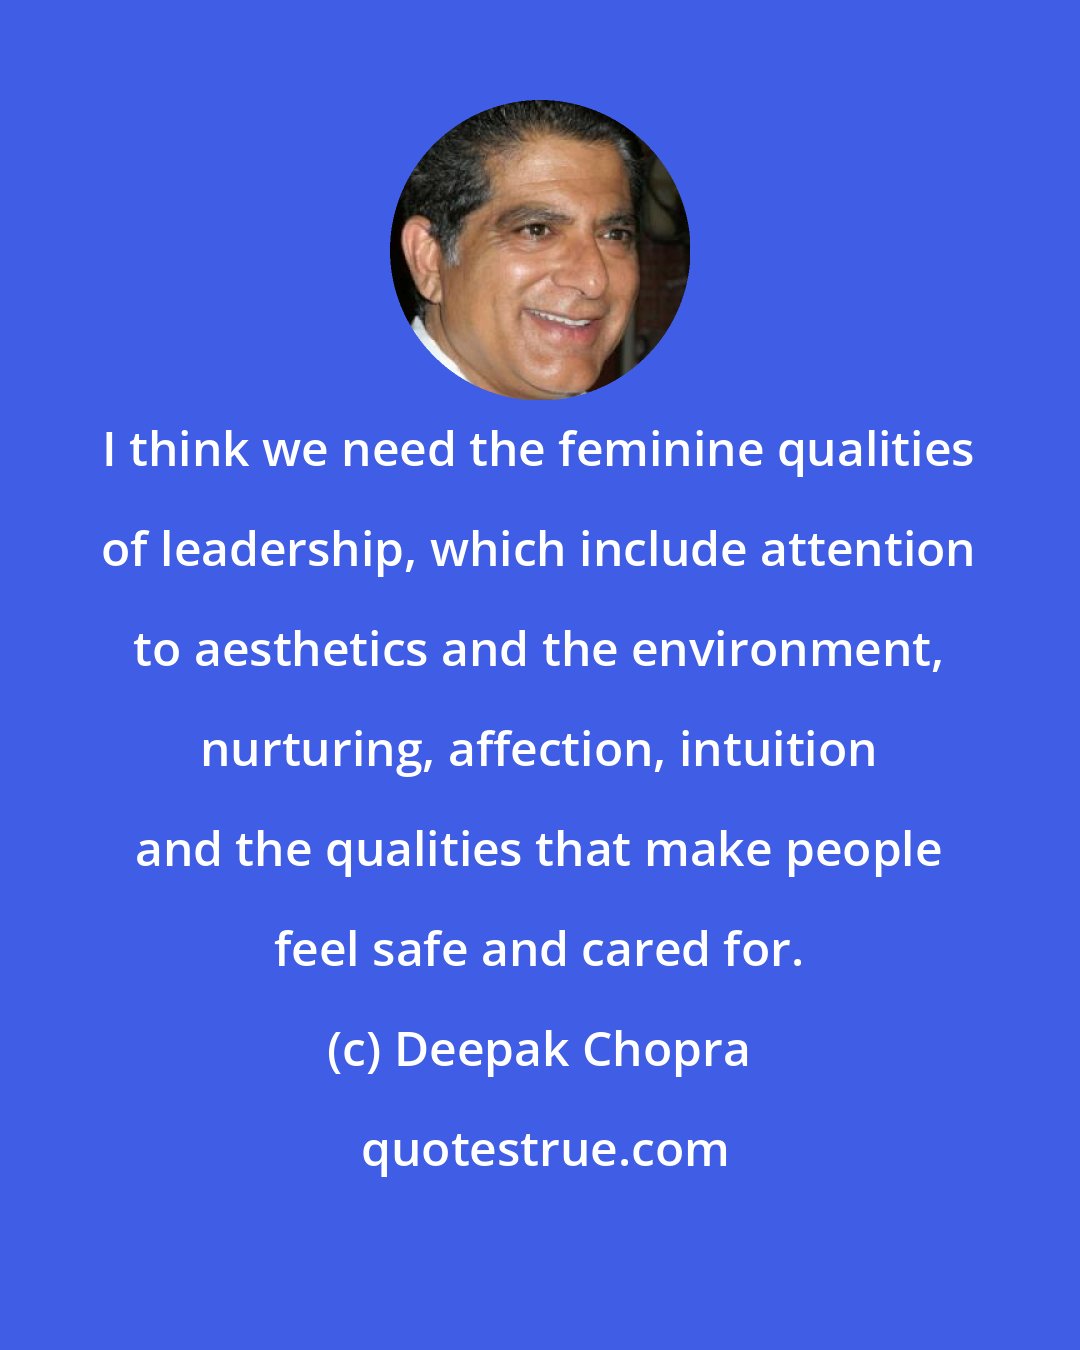 Deepak Chopra: I think we need the feminine qualities of leadership, which include attention to aesthetics and the environment, nurturing, affection, intuition and the qualities that make people feel safe and cared for.